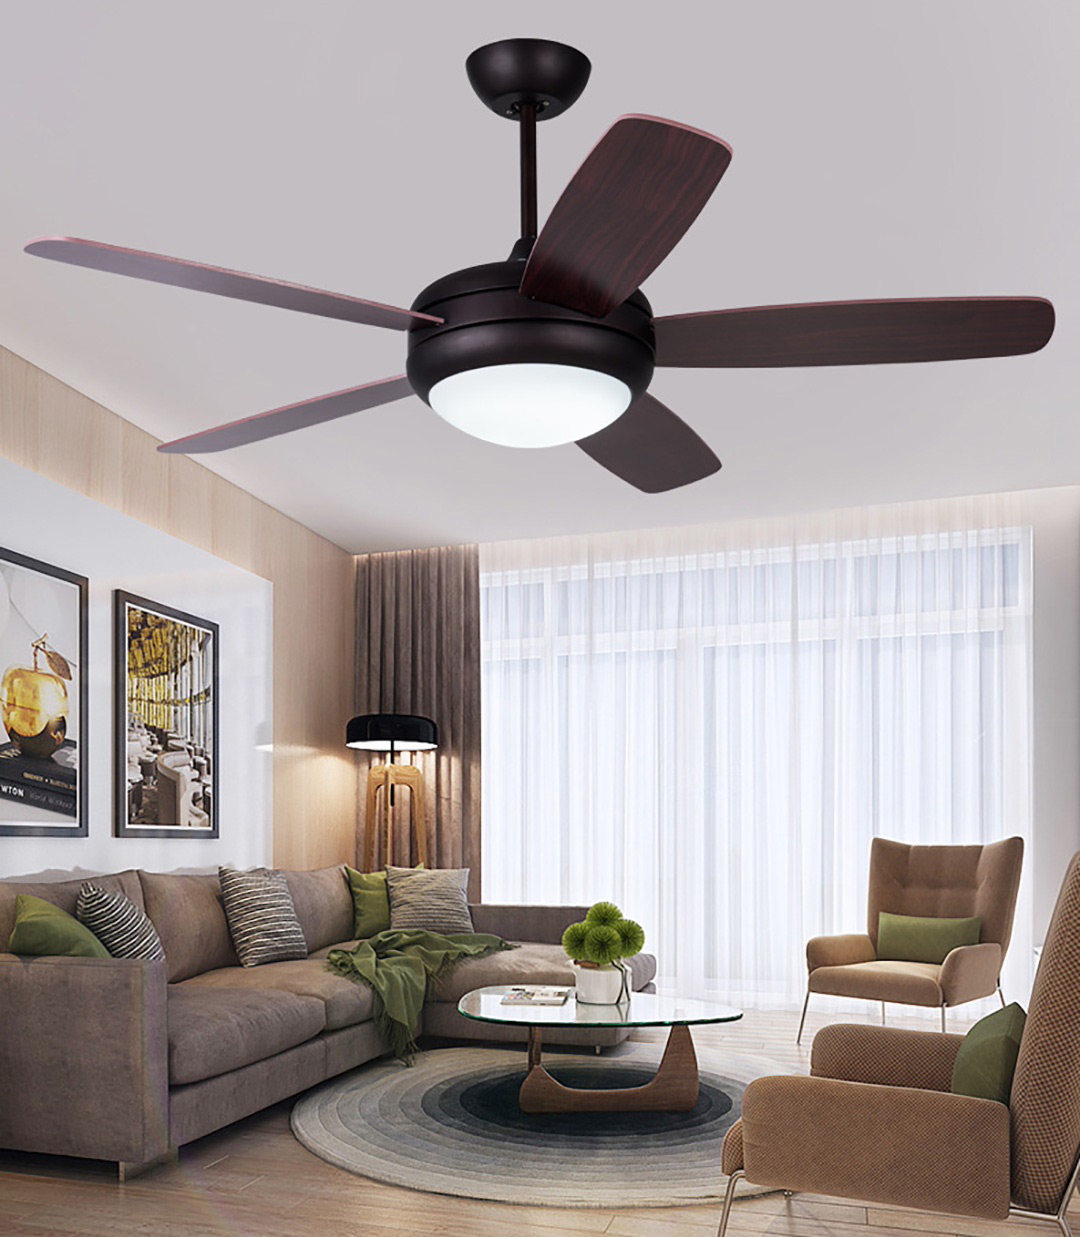 Fannc Ceiling Fan with Light – Wood Blade Series